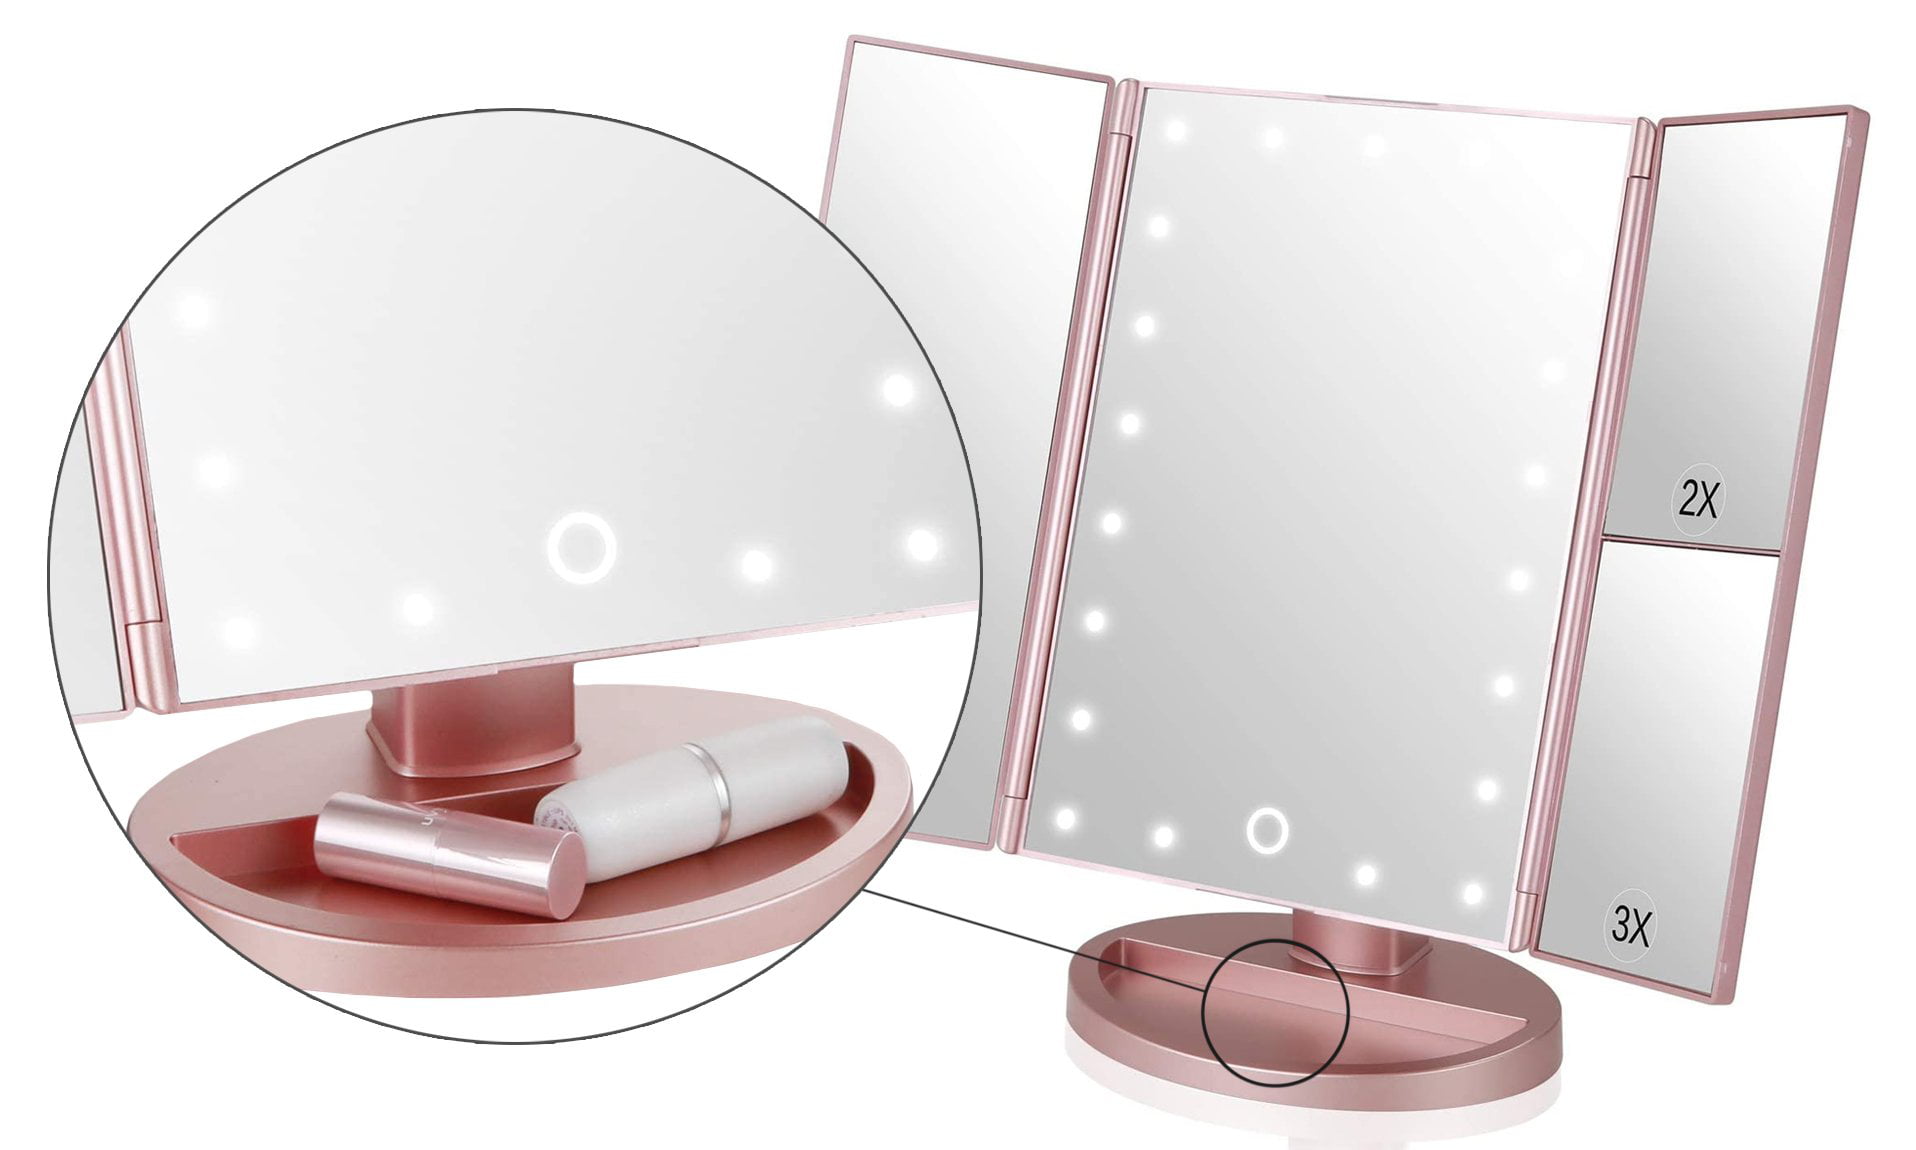 Makeup Vanity Mirror Magnifying with 21 LED Lights, Cosmetic Standing Table Mirror, 3X/2X Magnified Travel Foldaway Mirror, 180 Degree Rotation Rose Gold